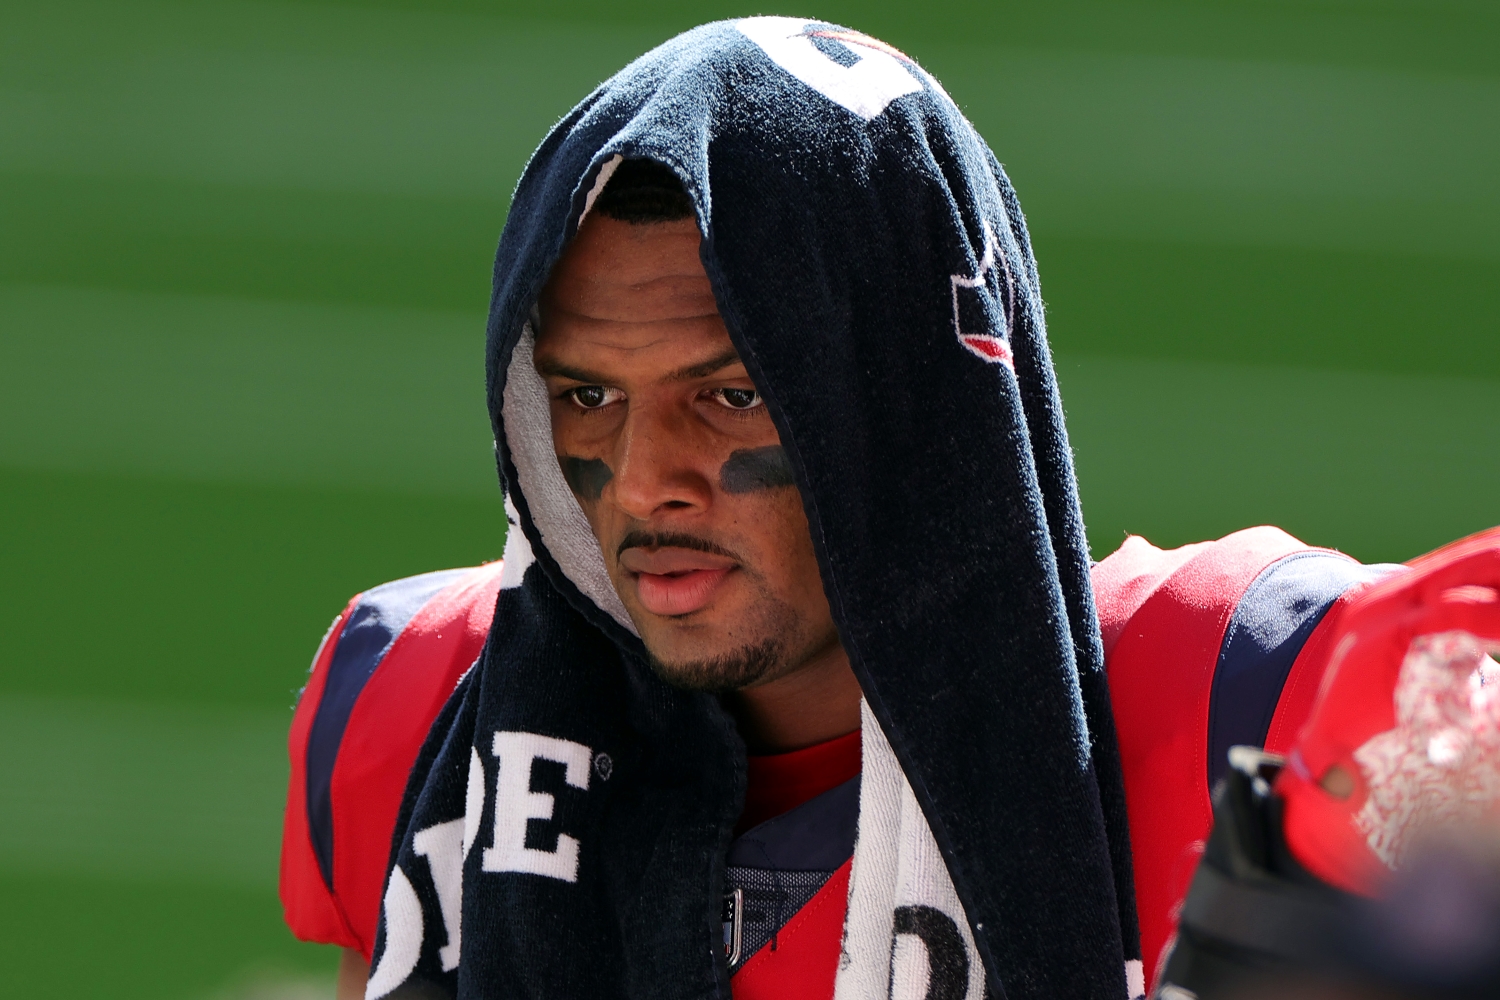 Houston Texans quarterback Deshaun Watson walks with a towel draped over his head during a game against the Indianapolis Colts.